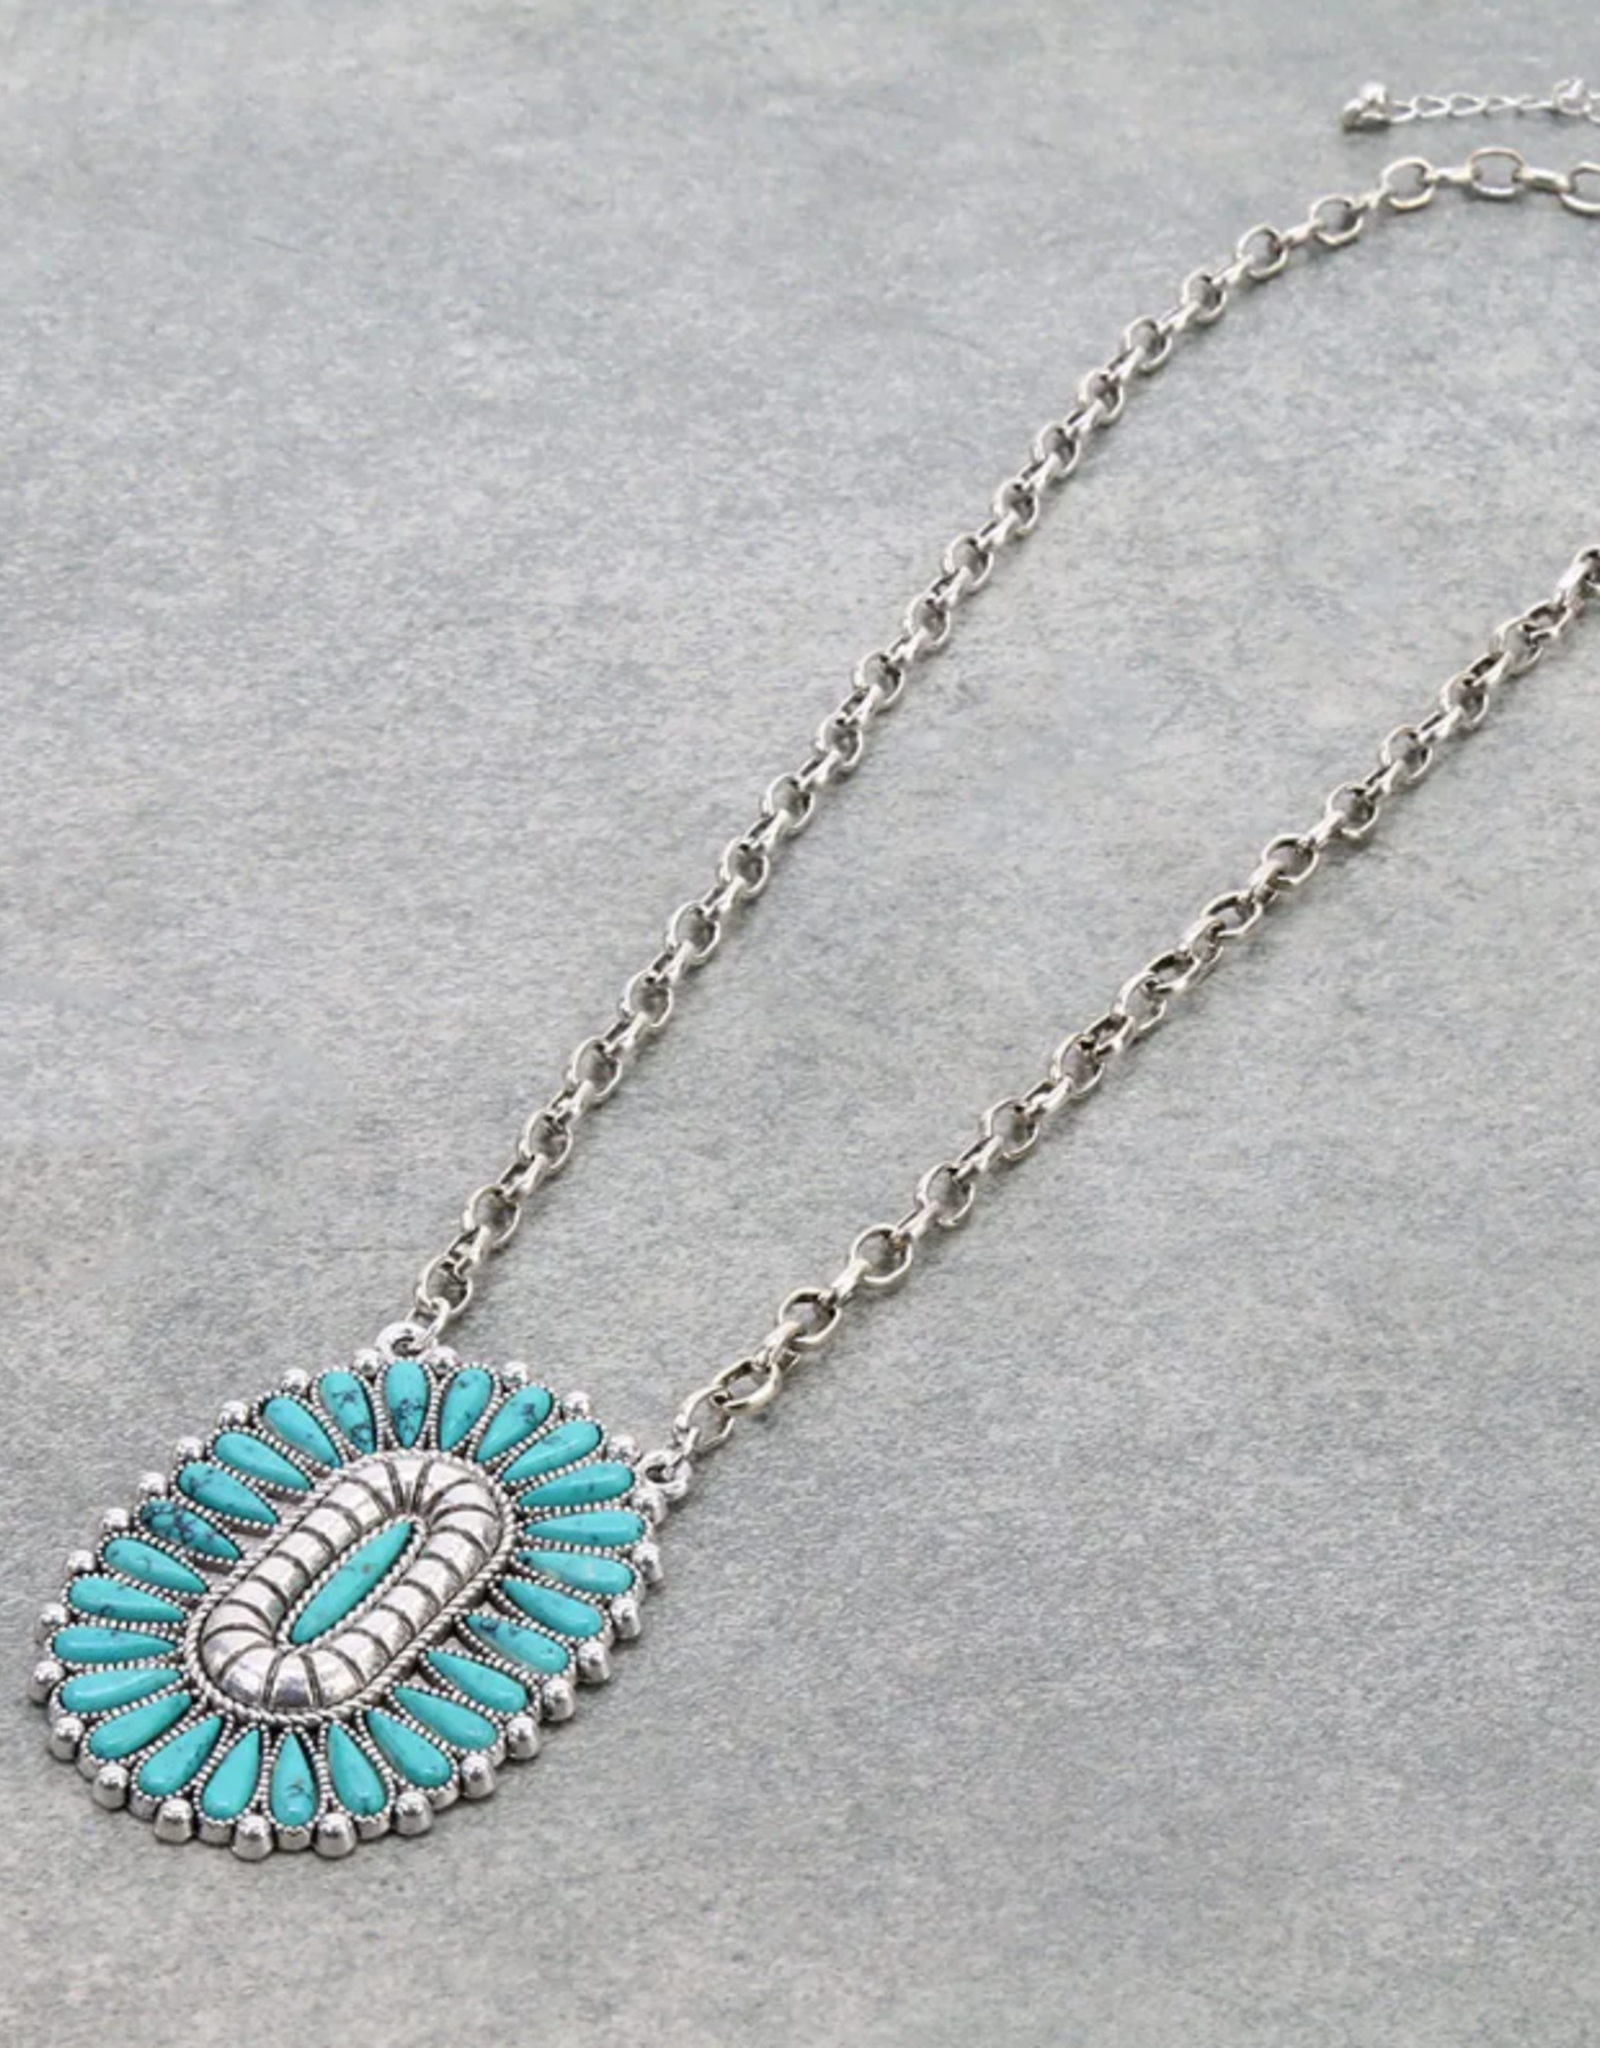 NECKLACE WESTERN TURQ CONCHO PENDANT W/CABLE CHAIN